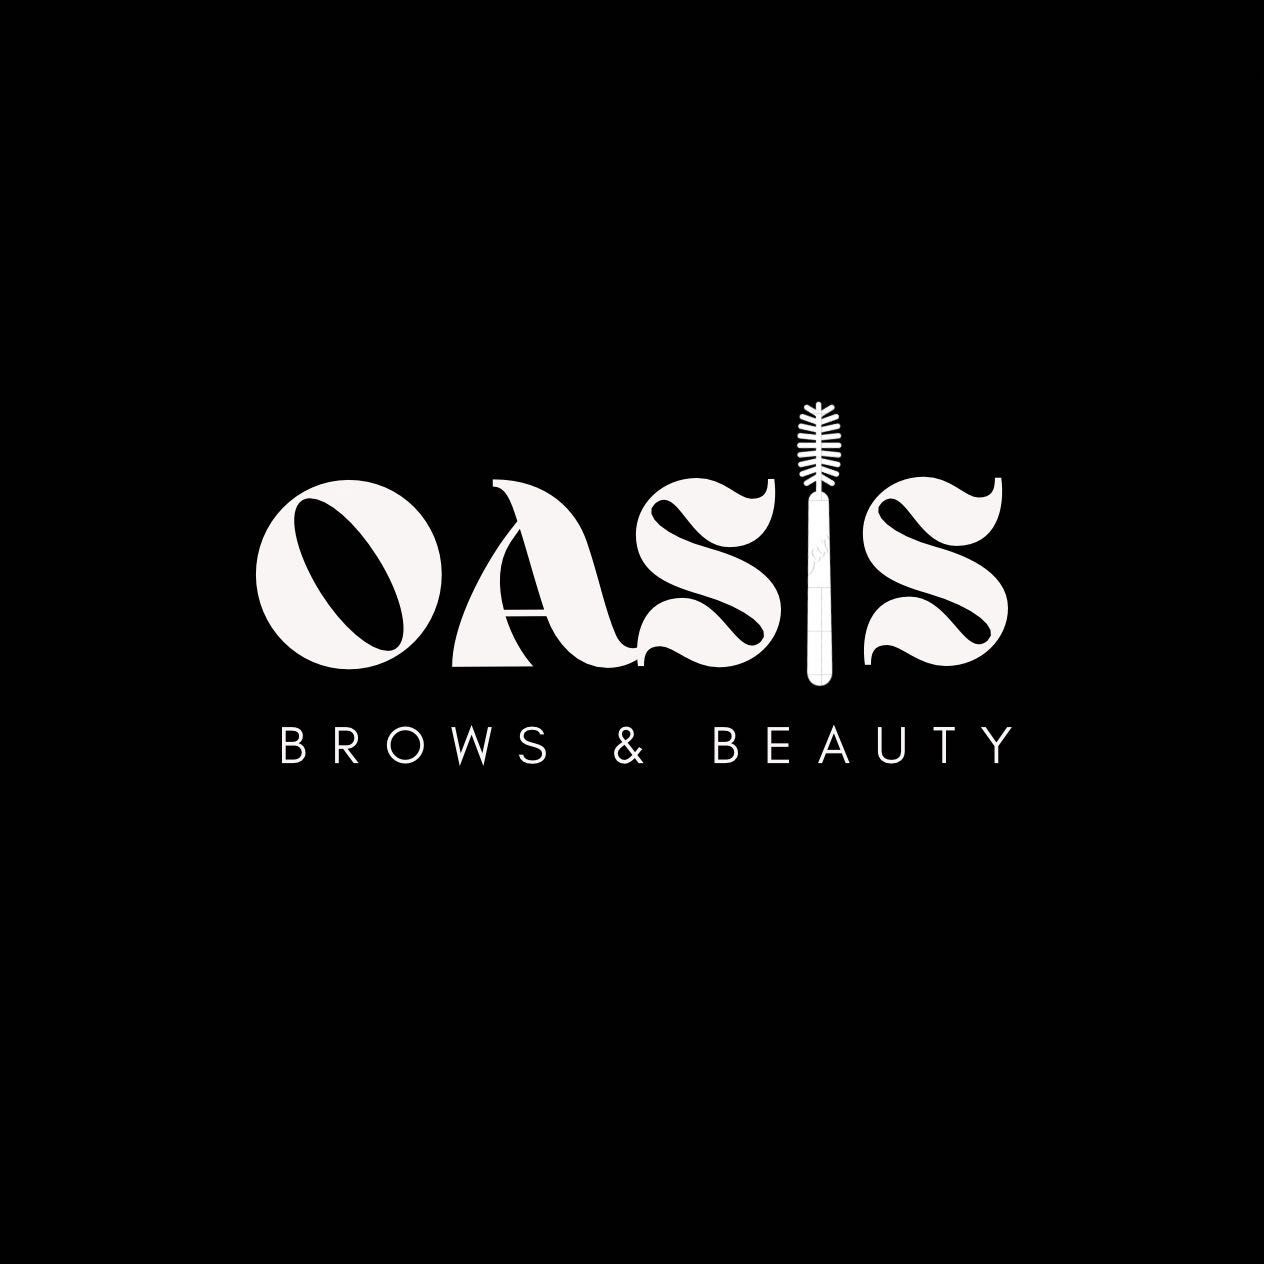 Oasis Brows And Beauty, 4701 N 10th St, McAllen, 78504